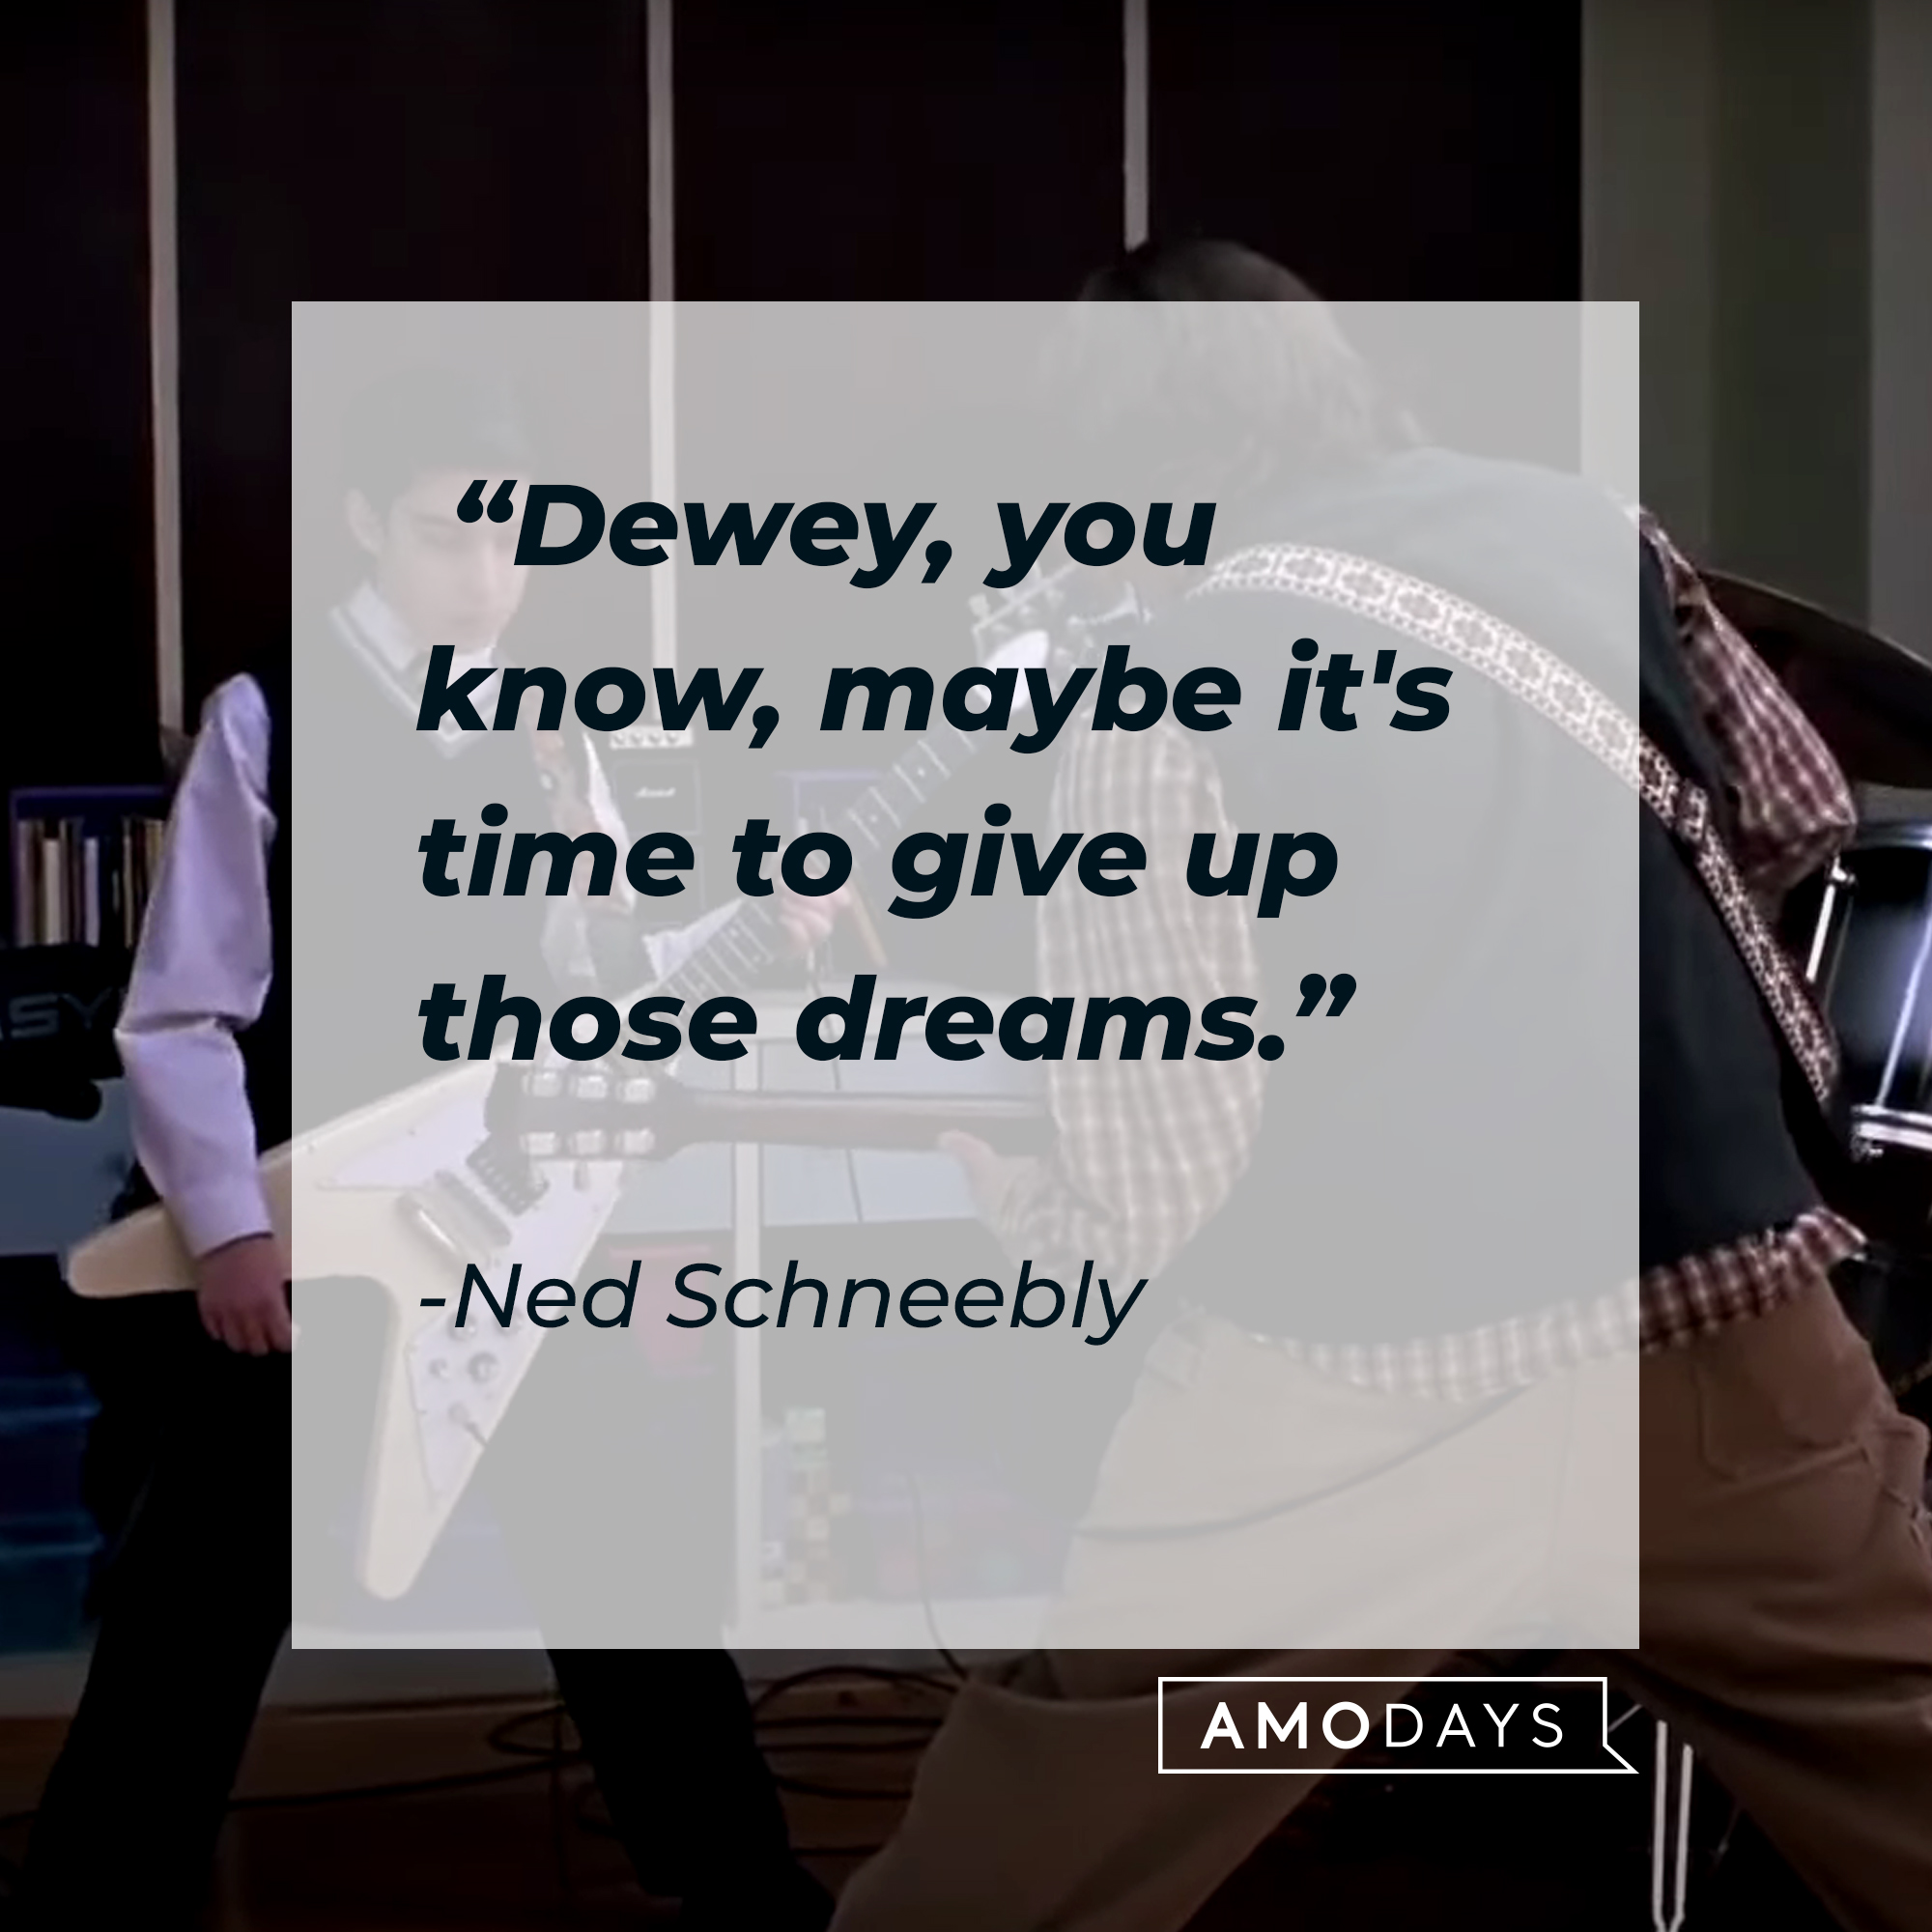 Zack and Dewey Finn, with  Ned Schneebly’s quote: “Dewey, you know, maybe it's time to give up those dreams.” | Source: youtube.com/paramountpictures